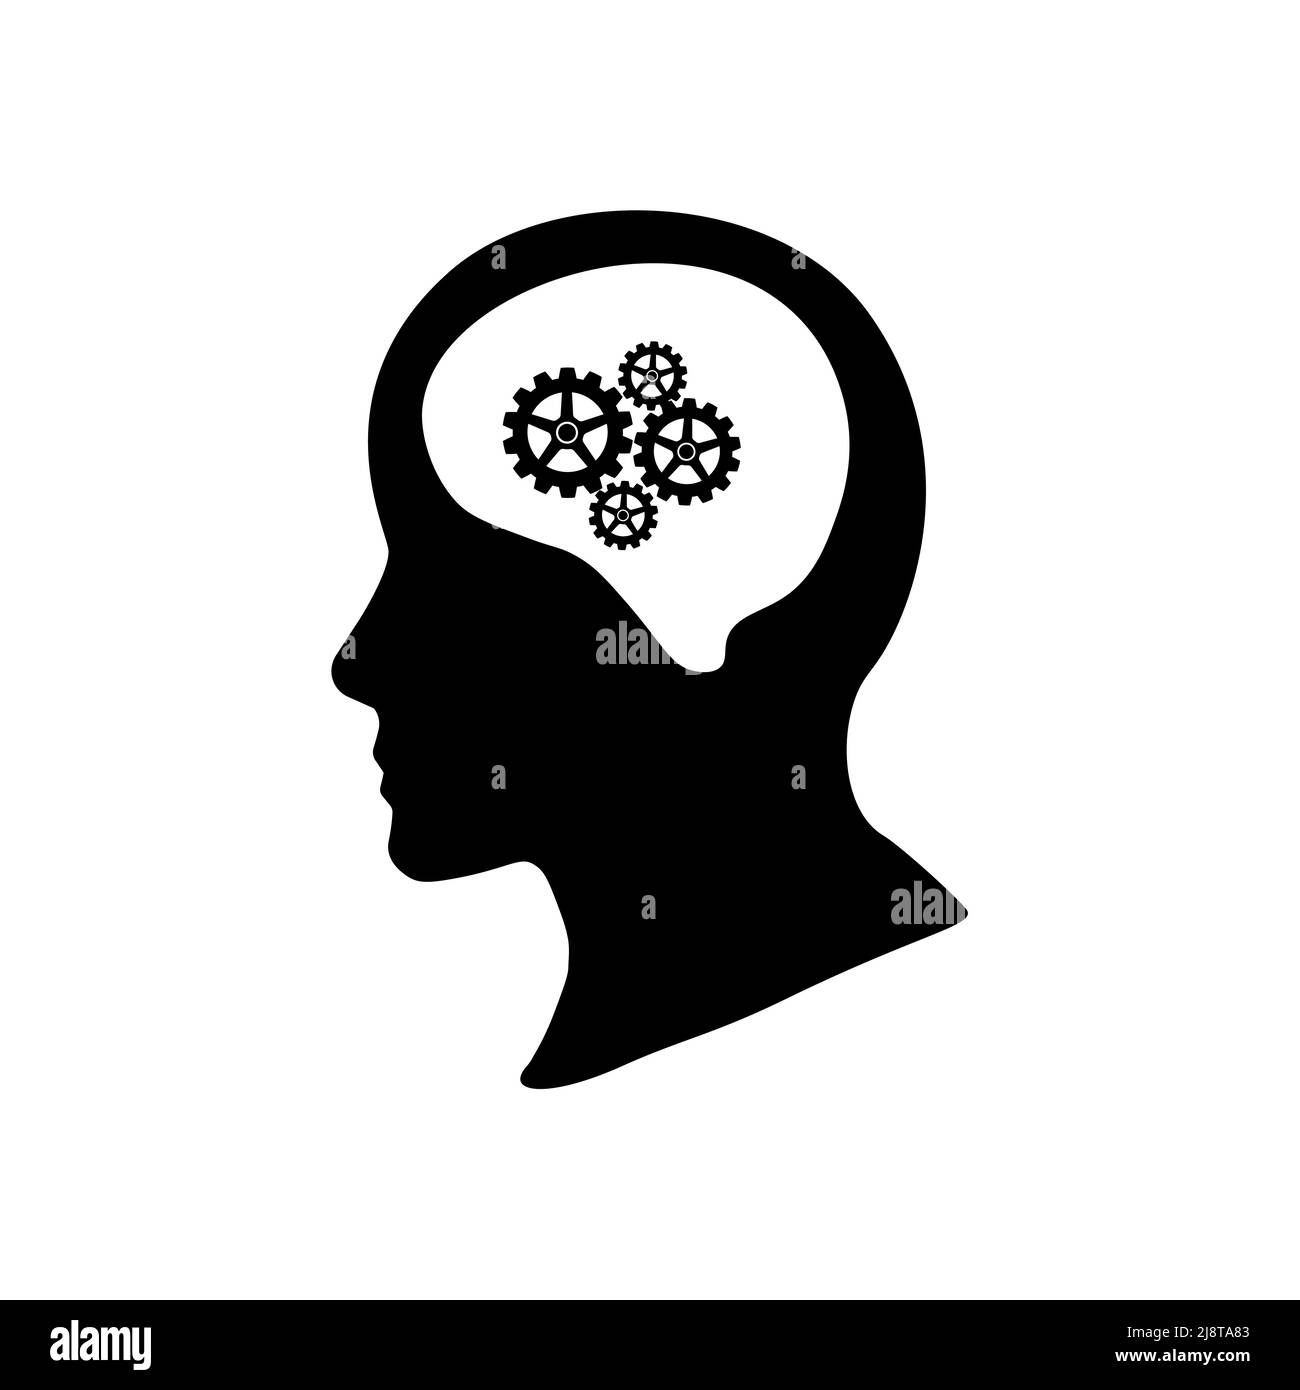 Silhouette of head and gear wheel. on white background. vector illustration Stock Vector